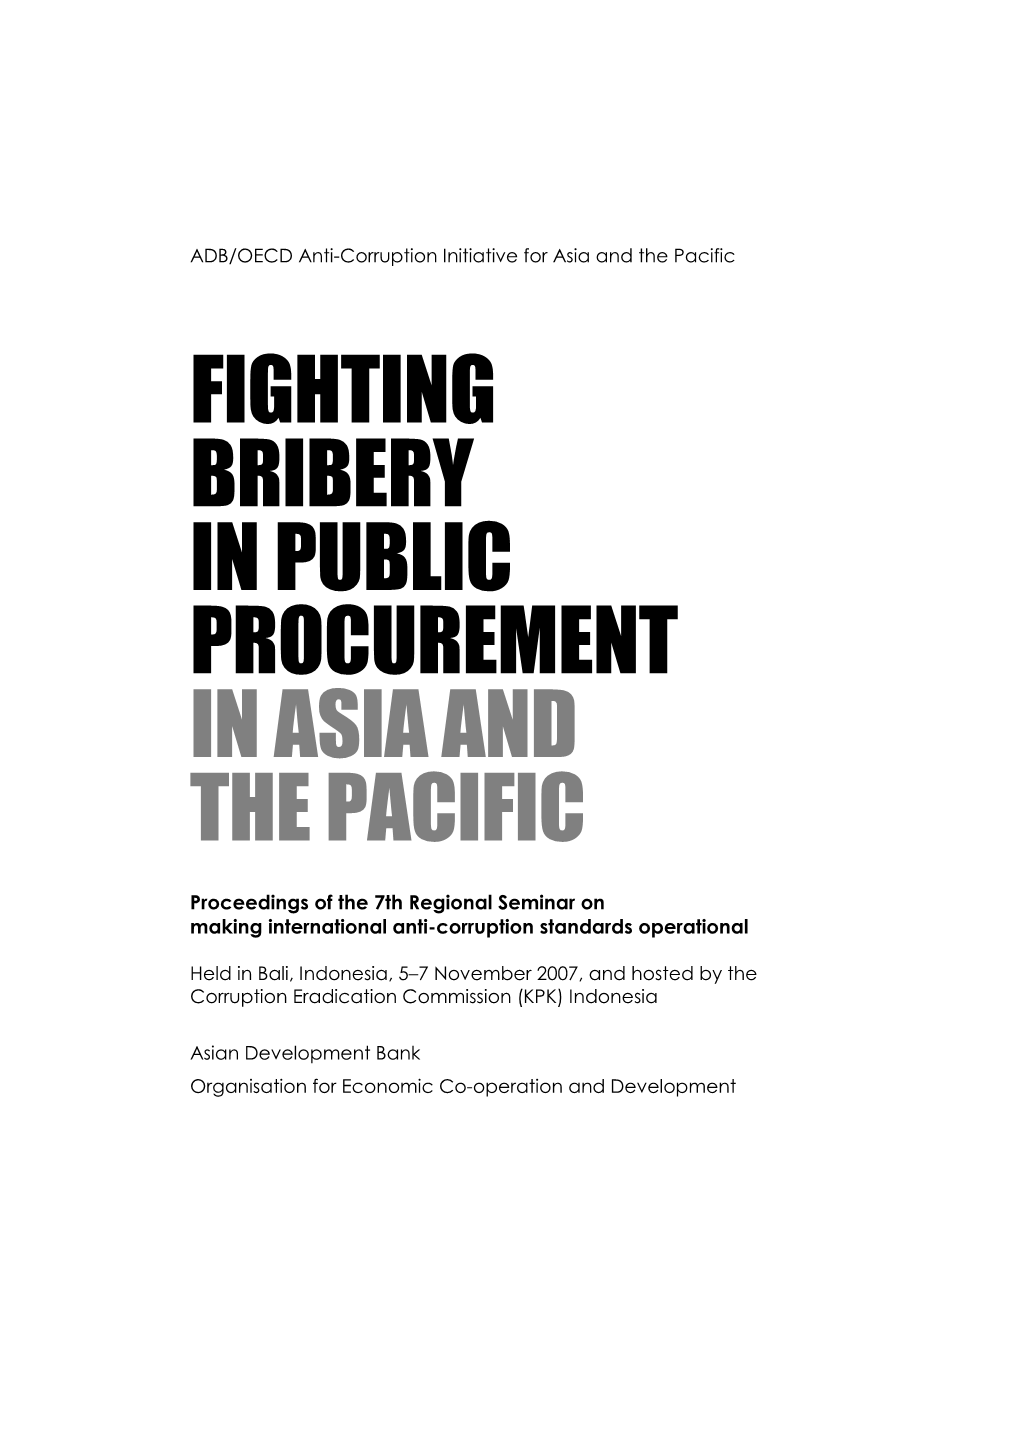 Fighting Bribery in Public Procurement in Asia and the Pacific